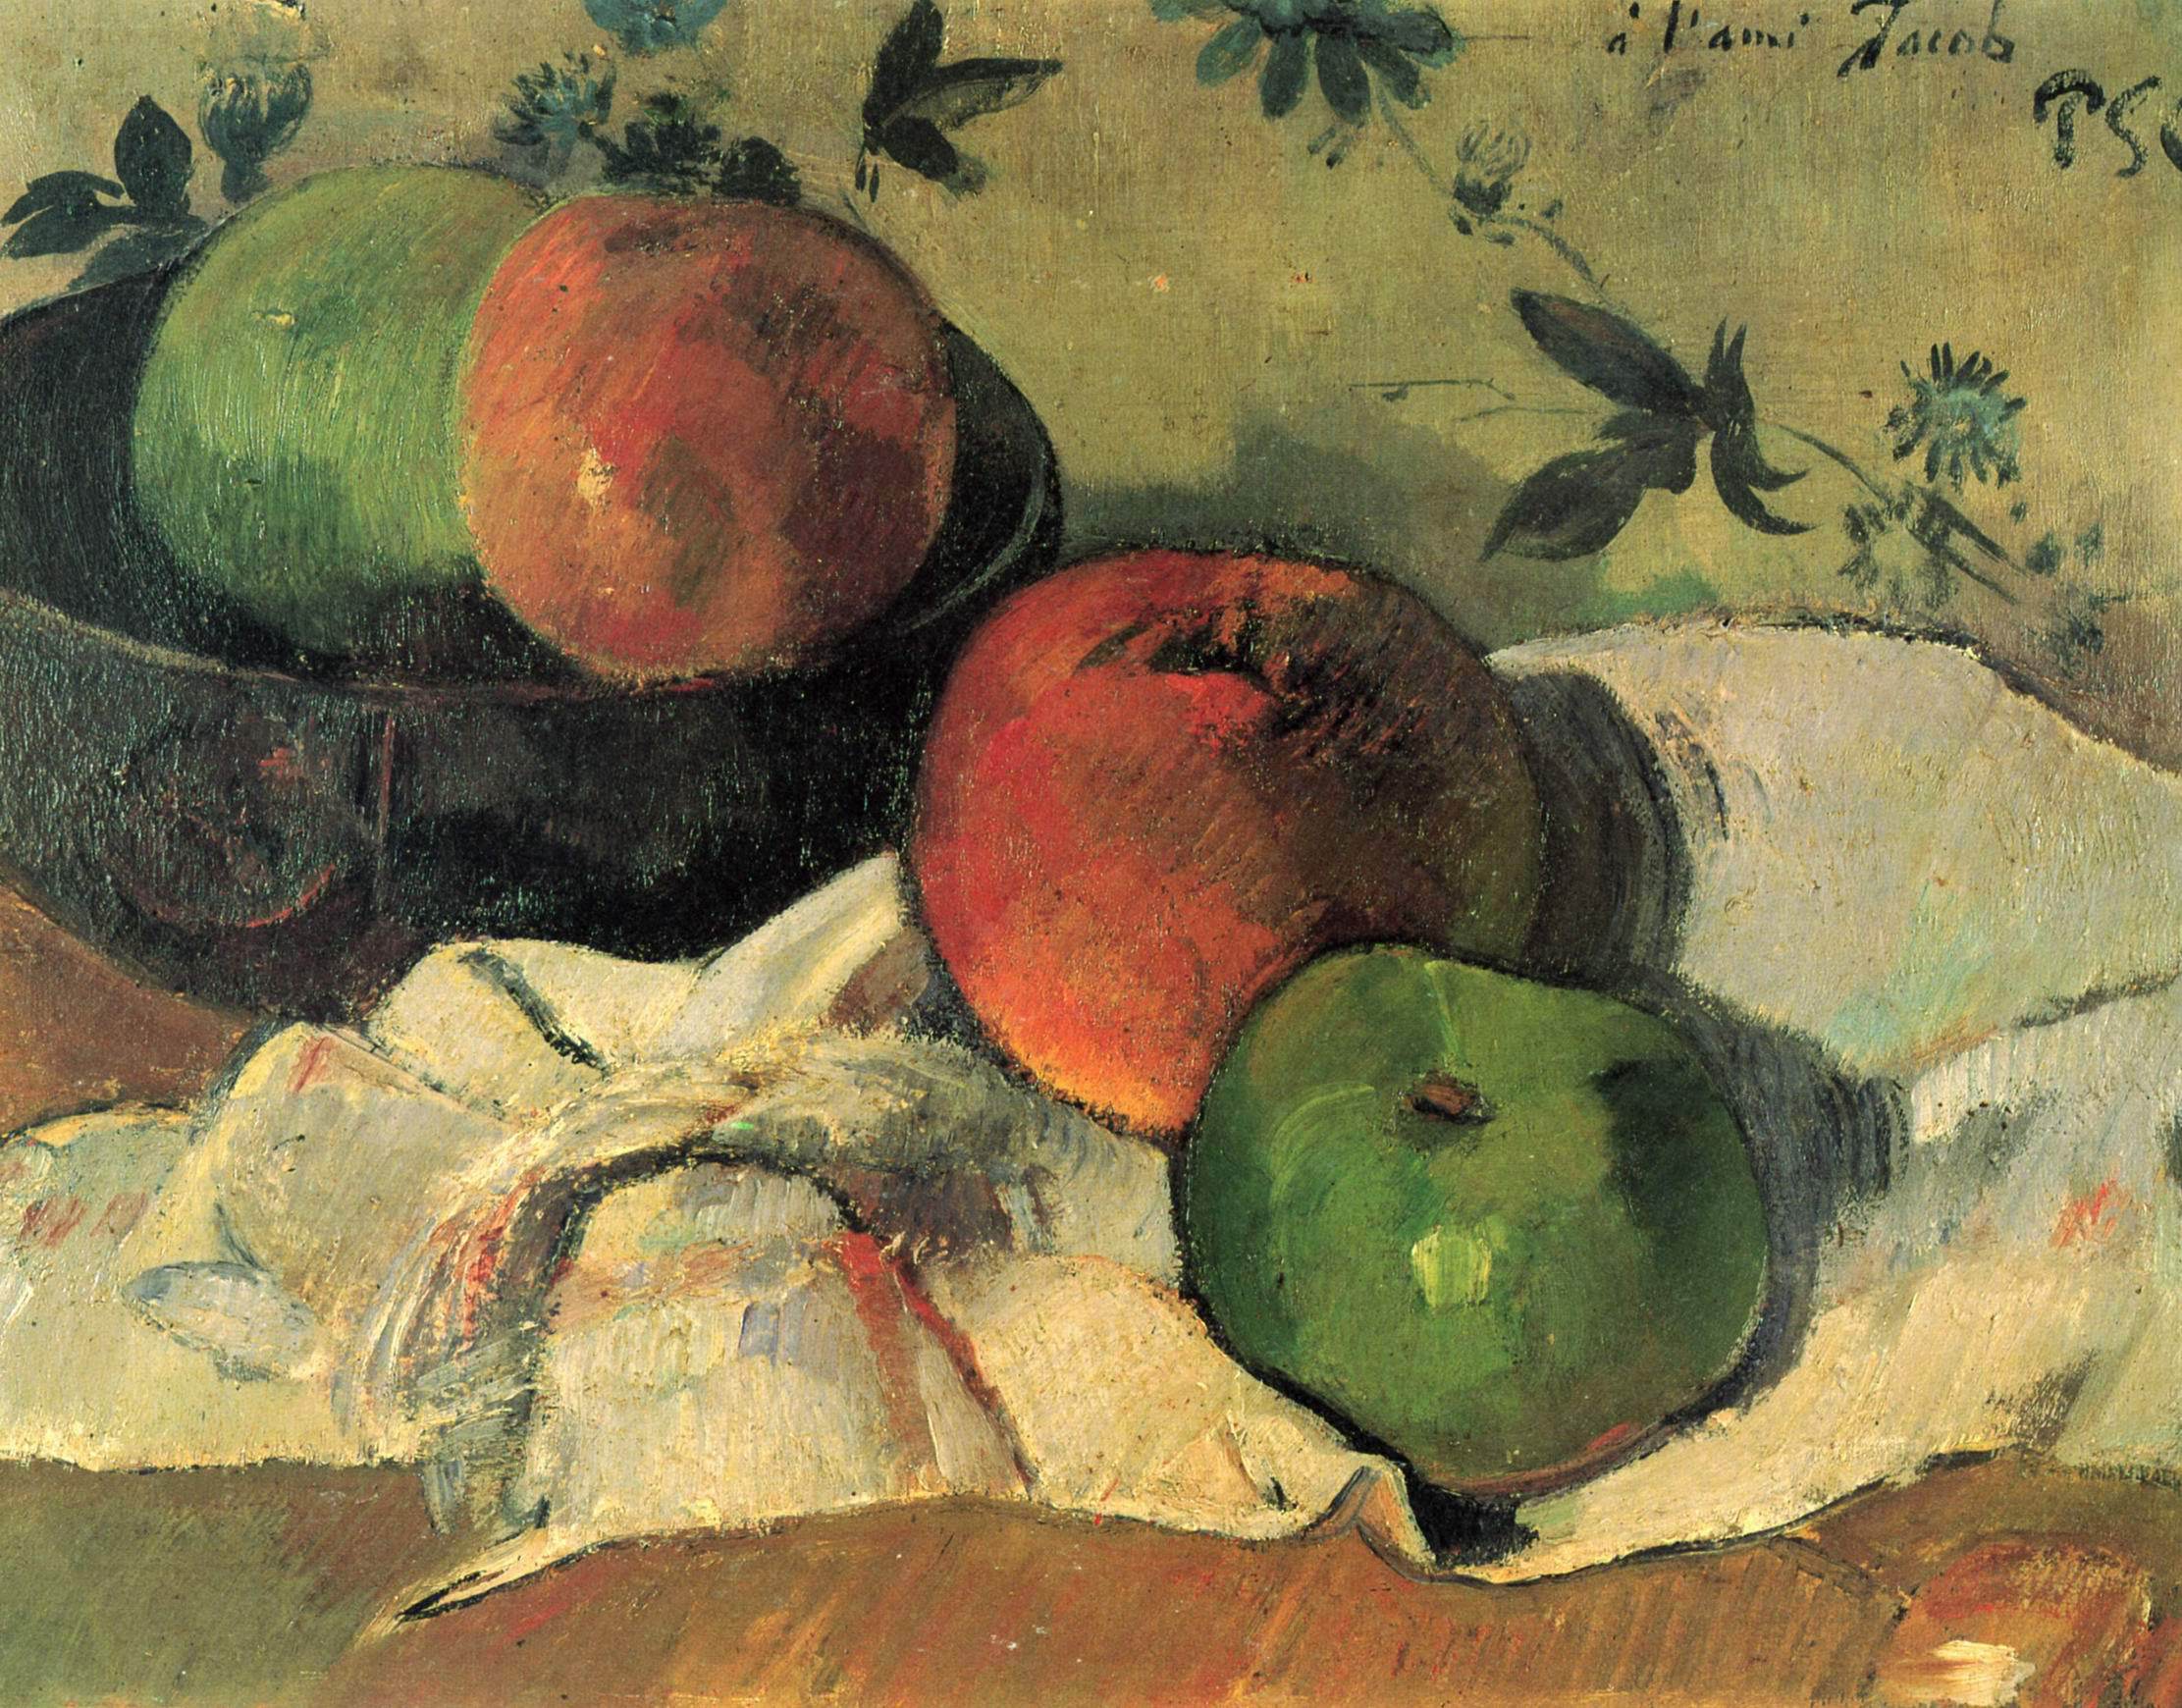 Painting Cezanne   Apples wallpapers and images